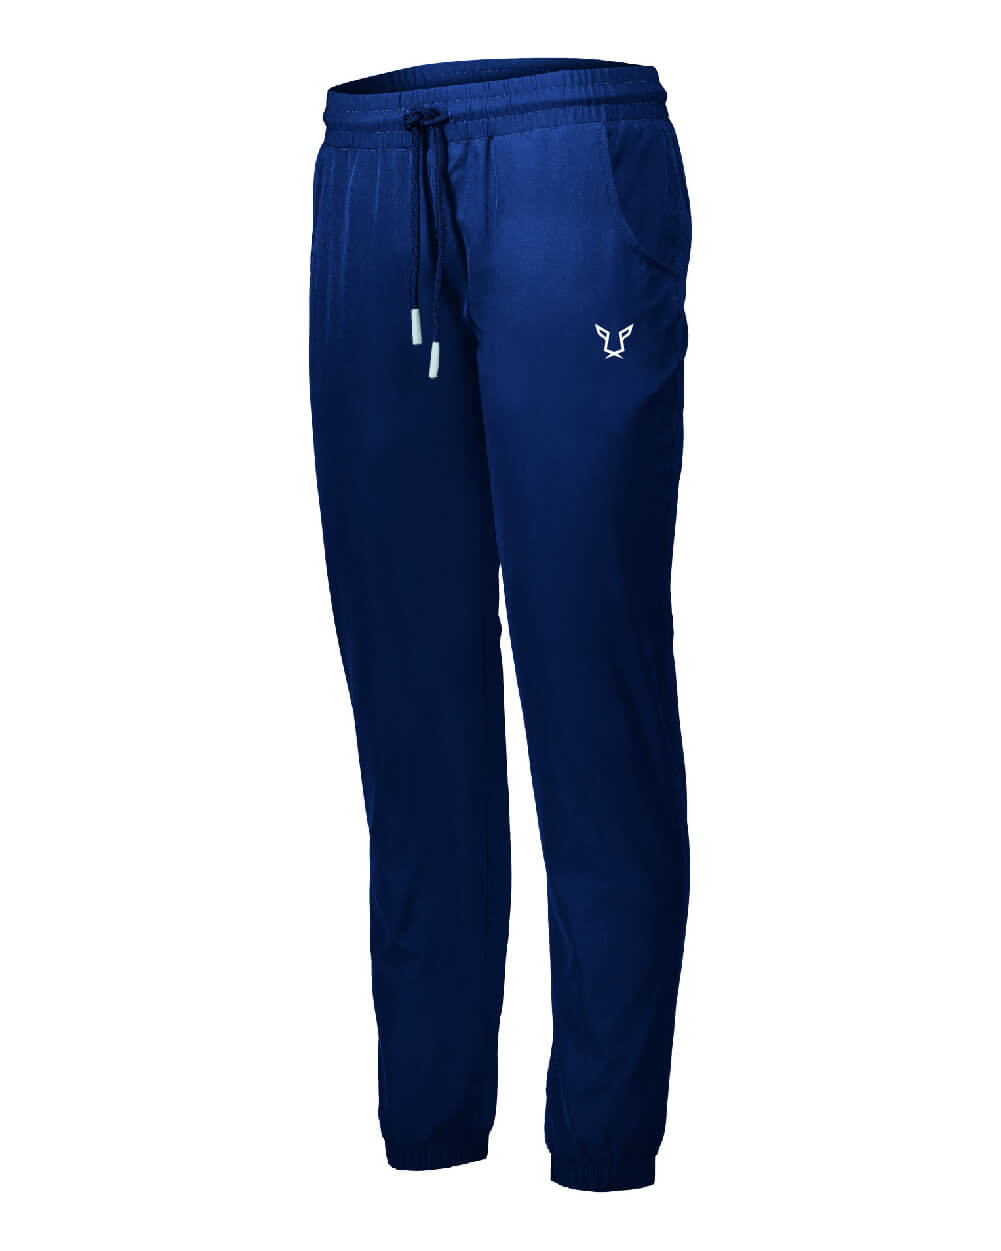 Women's Navy Evolution Performance Joggers by Odisi Apparel